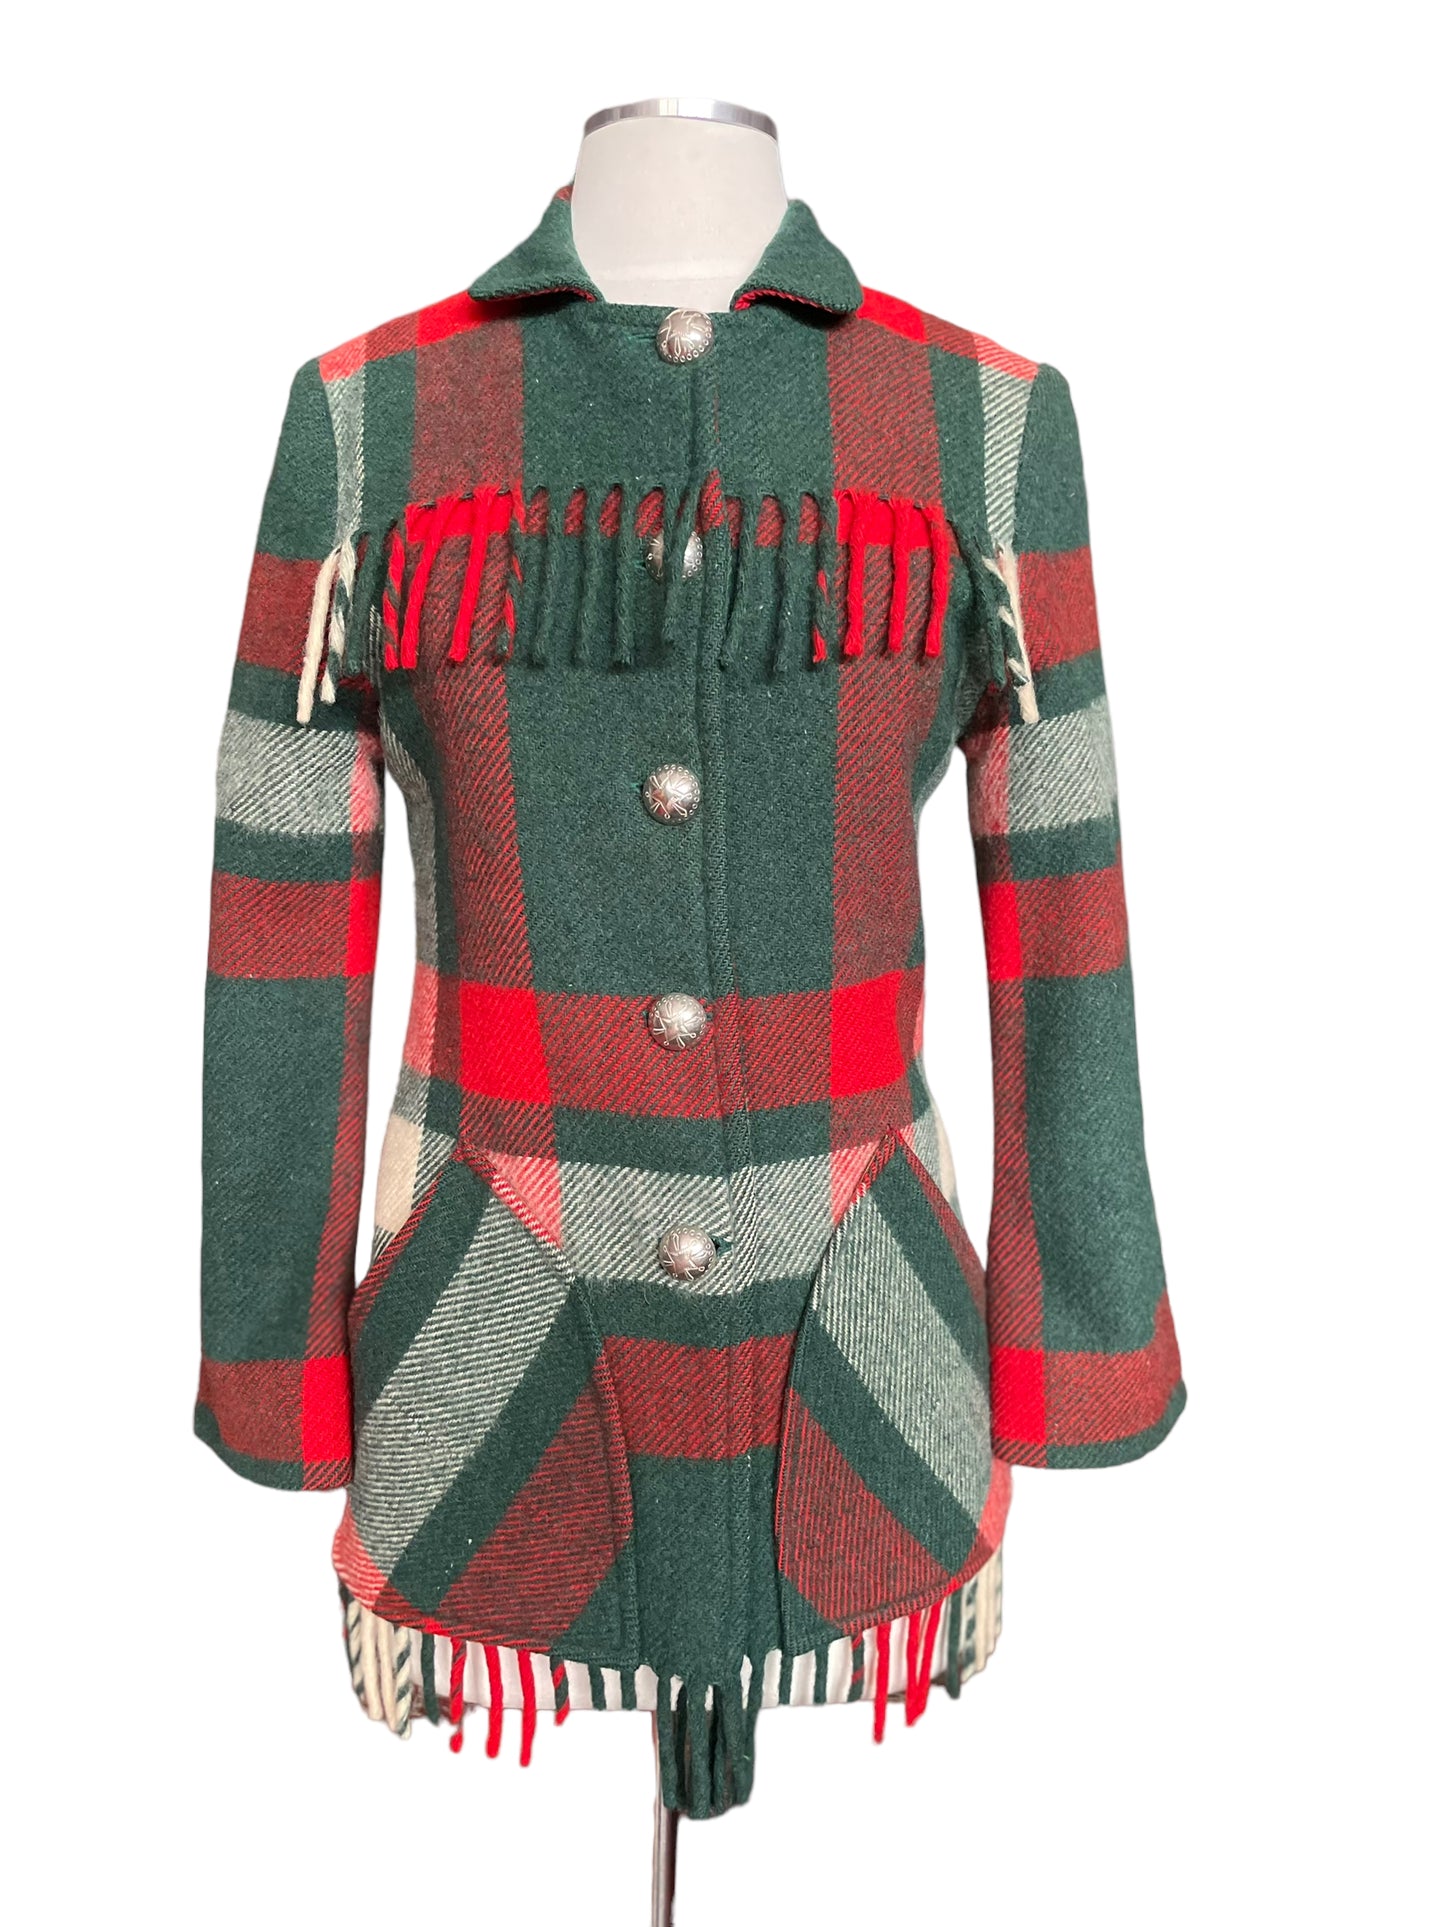 Full front view of Vintage 1940s Dall Smith Wool Blanket Coat SZ XS | Seattle True Vintage | Barn Owl Vintage Coats